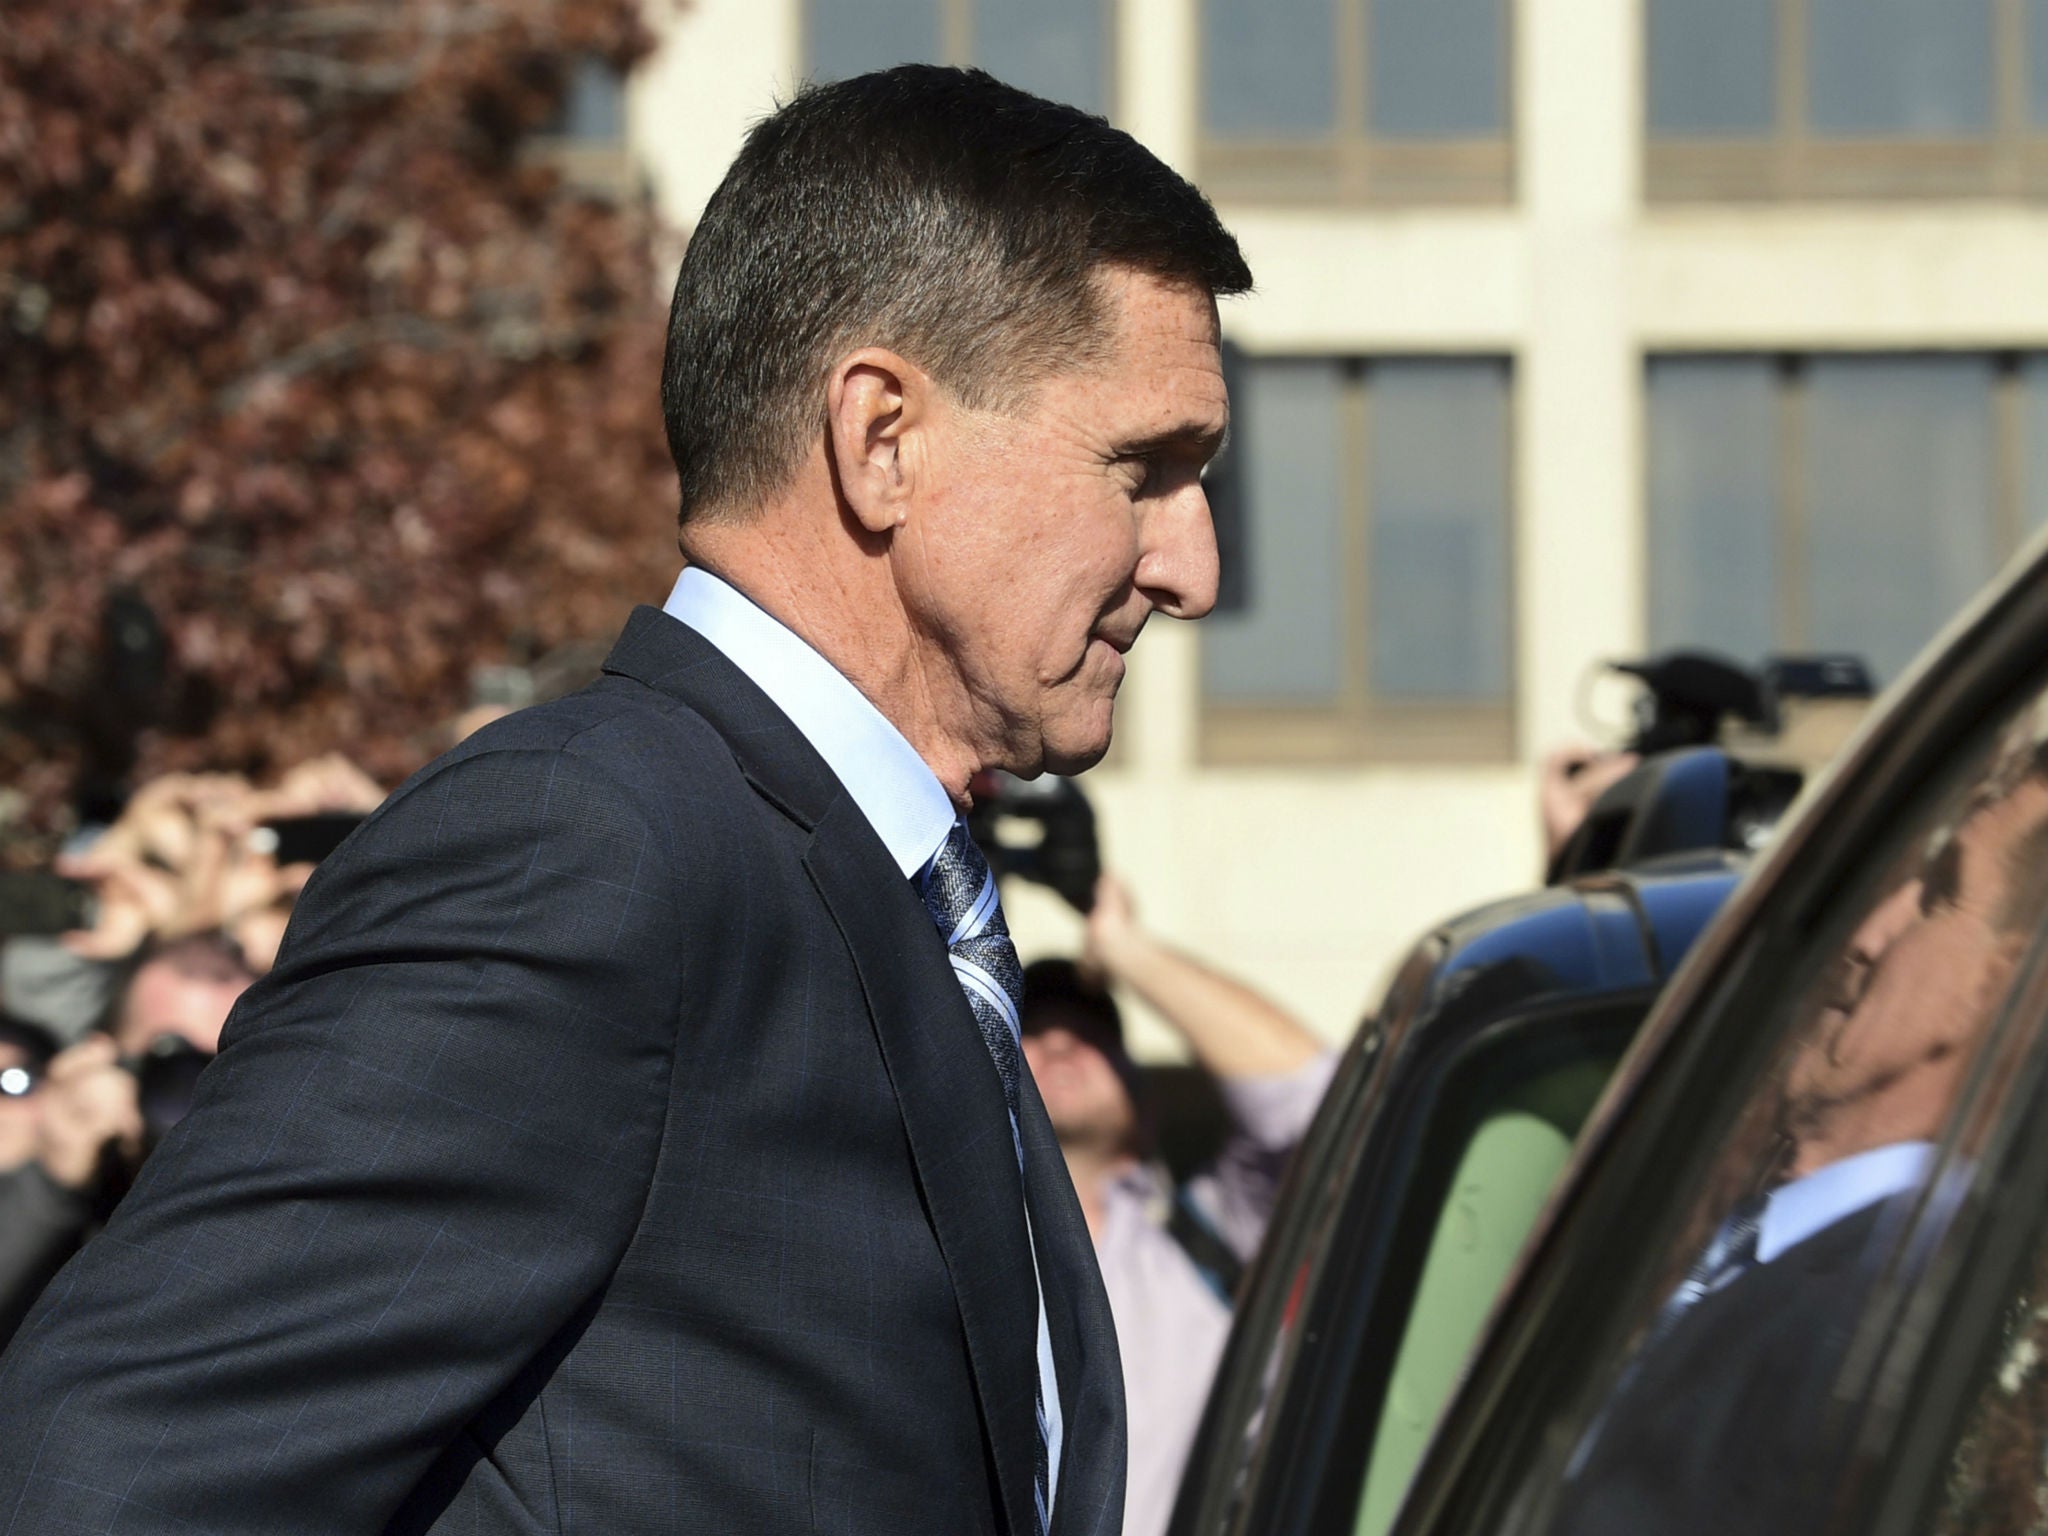 The charging of Michael Flynn, seen here leaving federal court in Washington, DC on Dec. 1, 2017, has rattled the White House